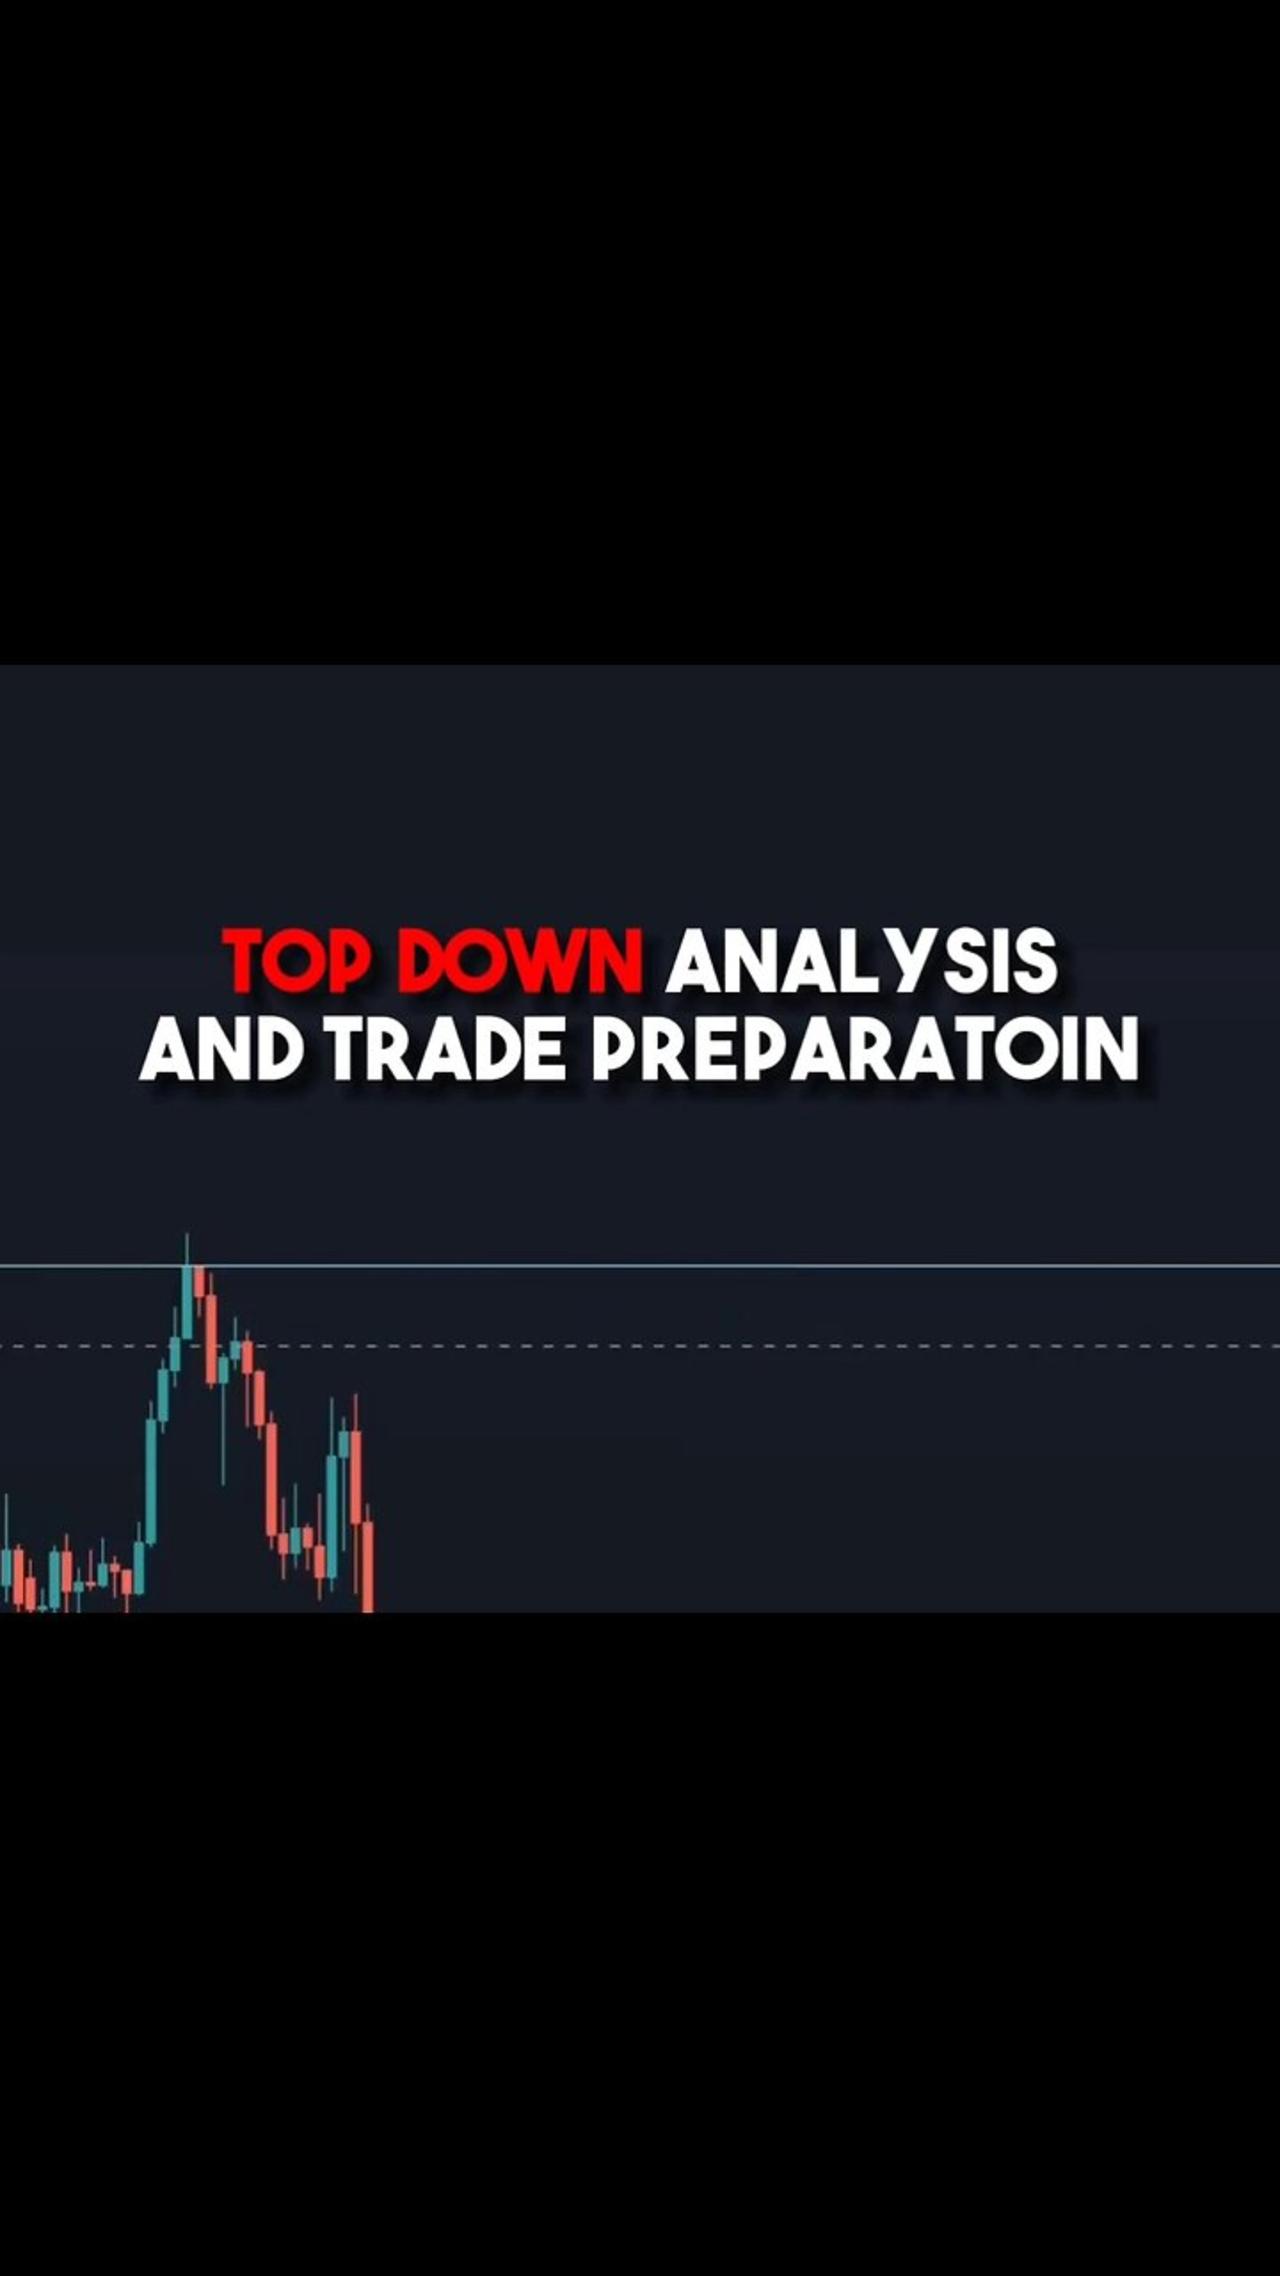 How to prepare for trade